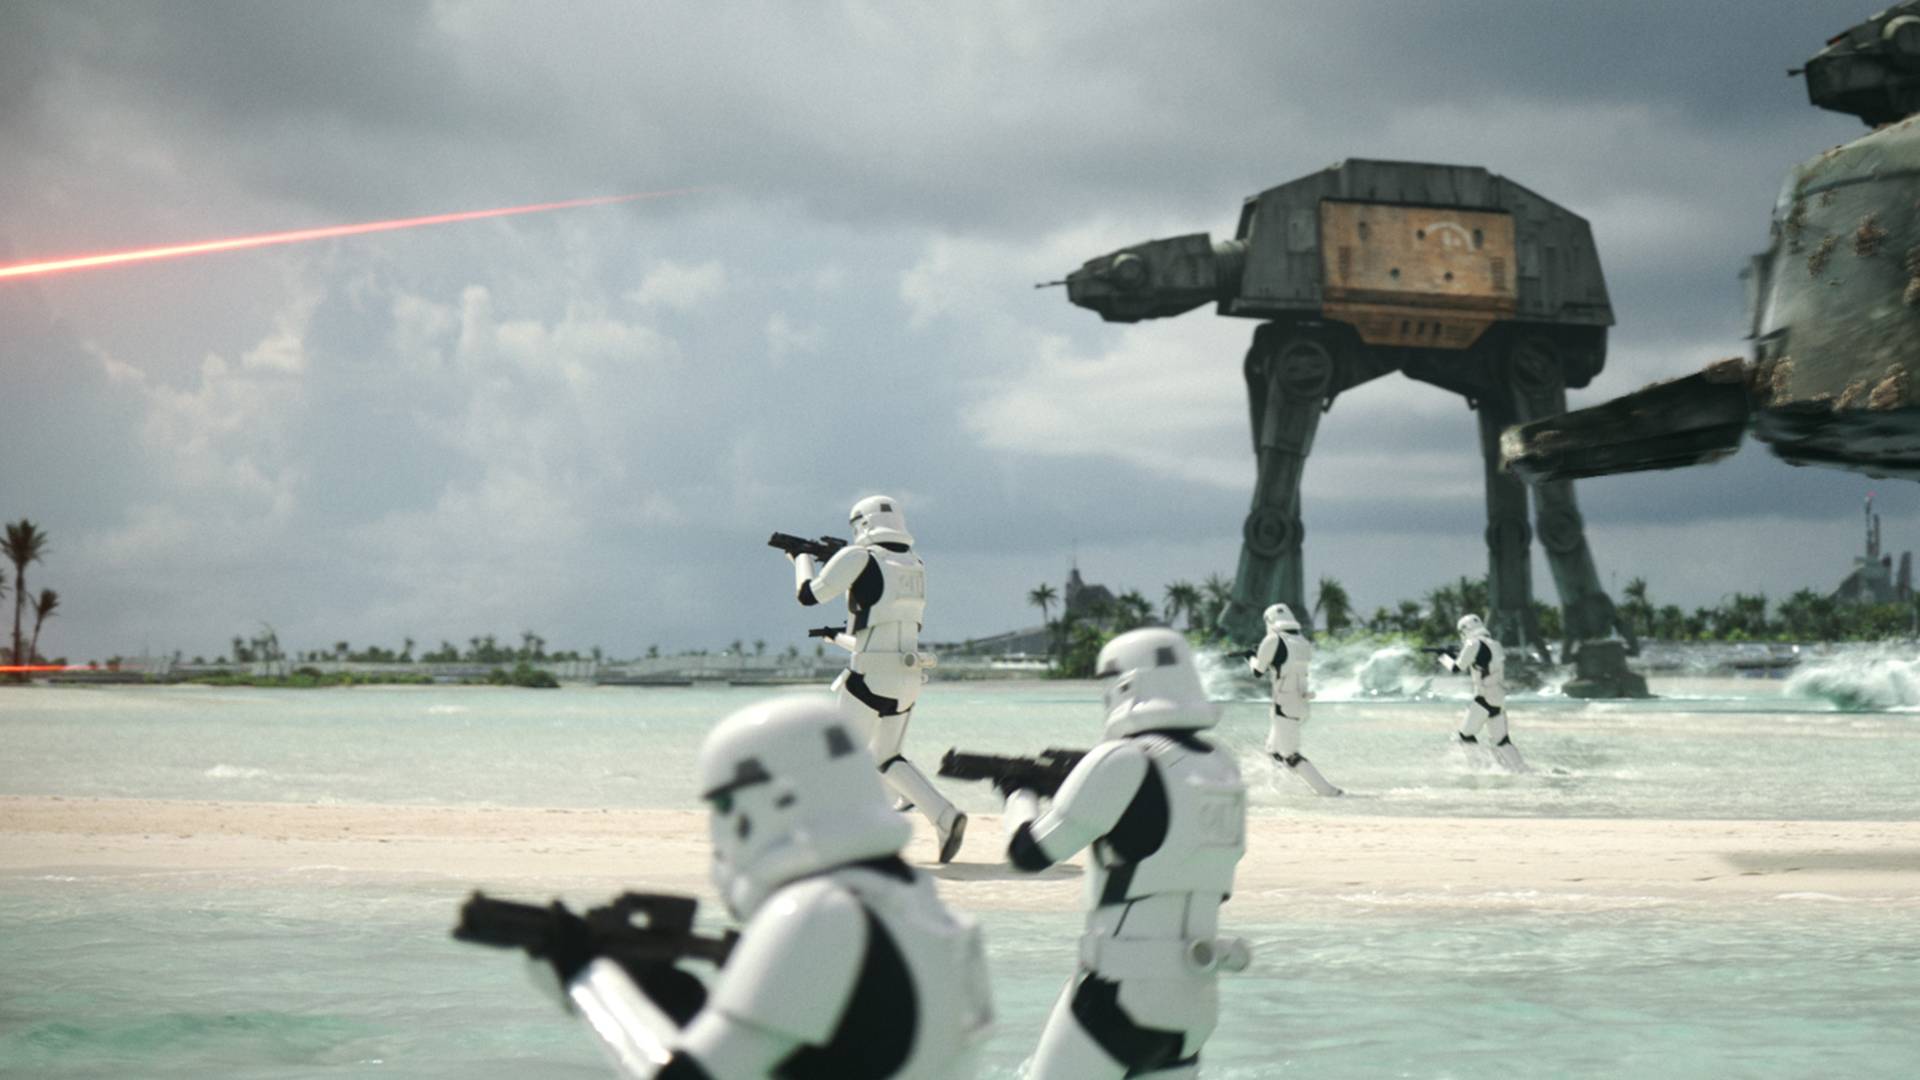 battle scene from rogue on on a beach in the maldives